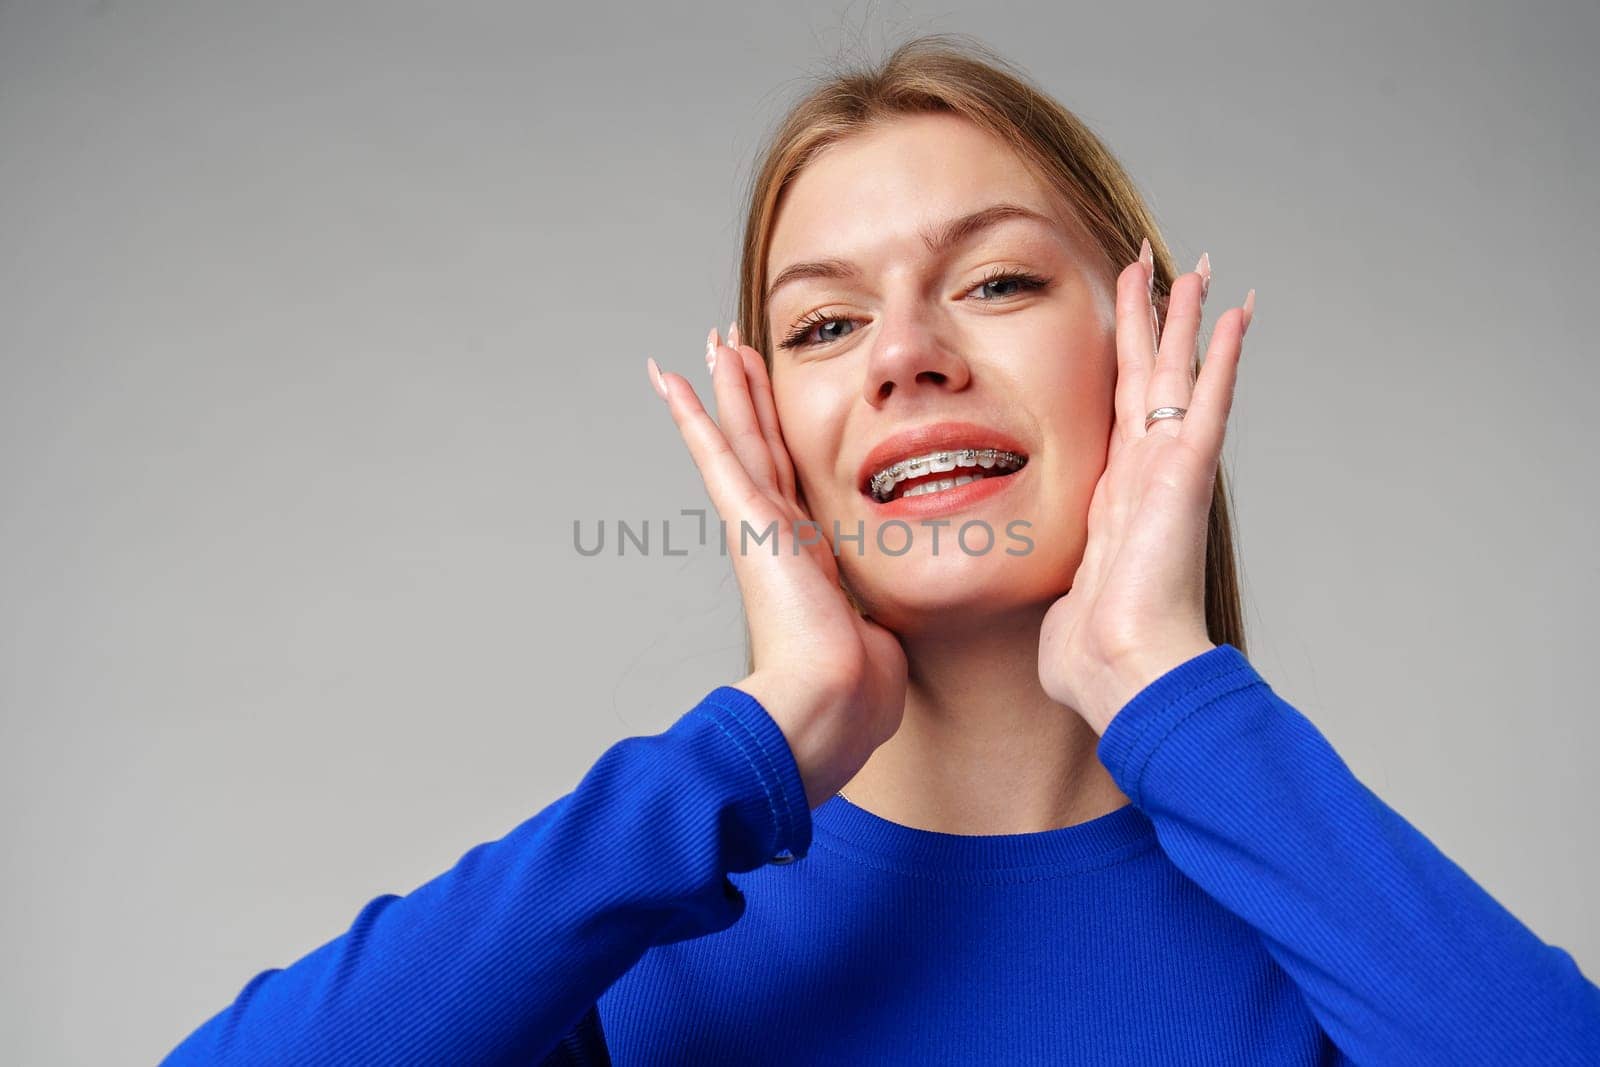 Young Woman Expressing Surprise or Confusion Against a Grey Background in studio